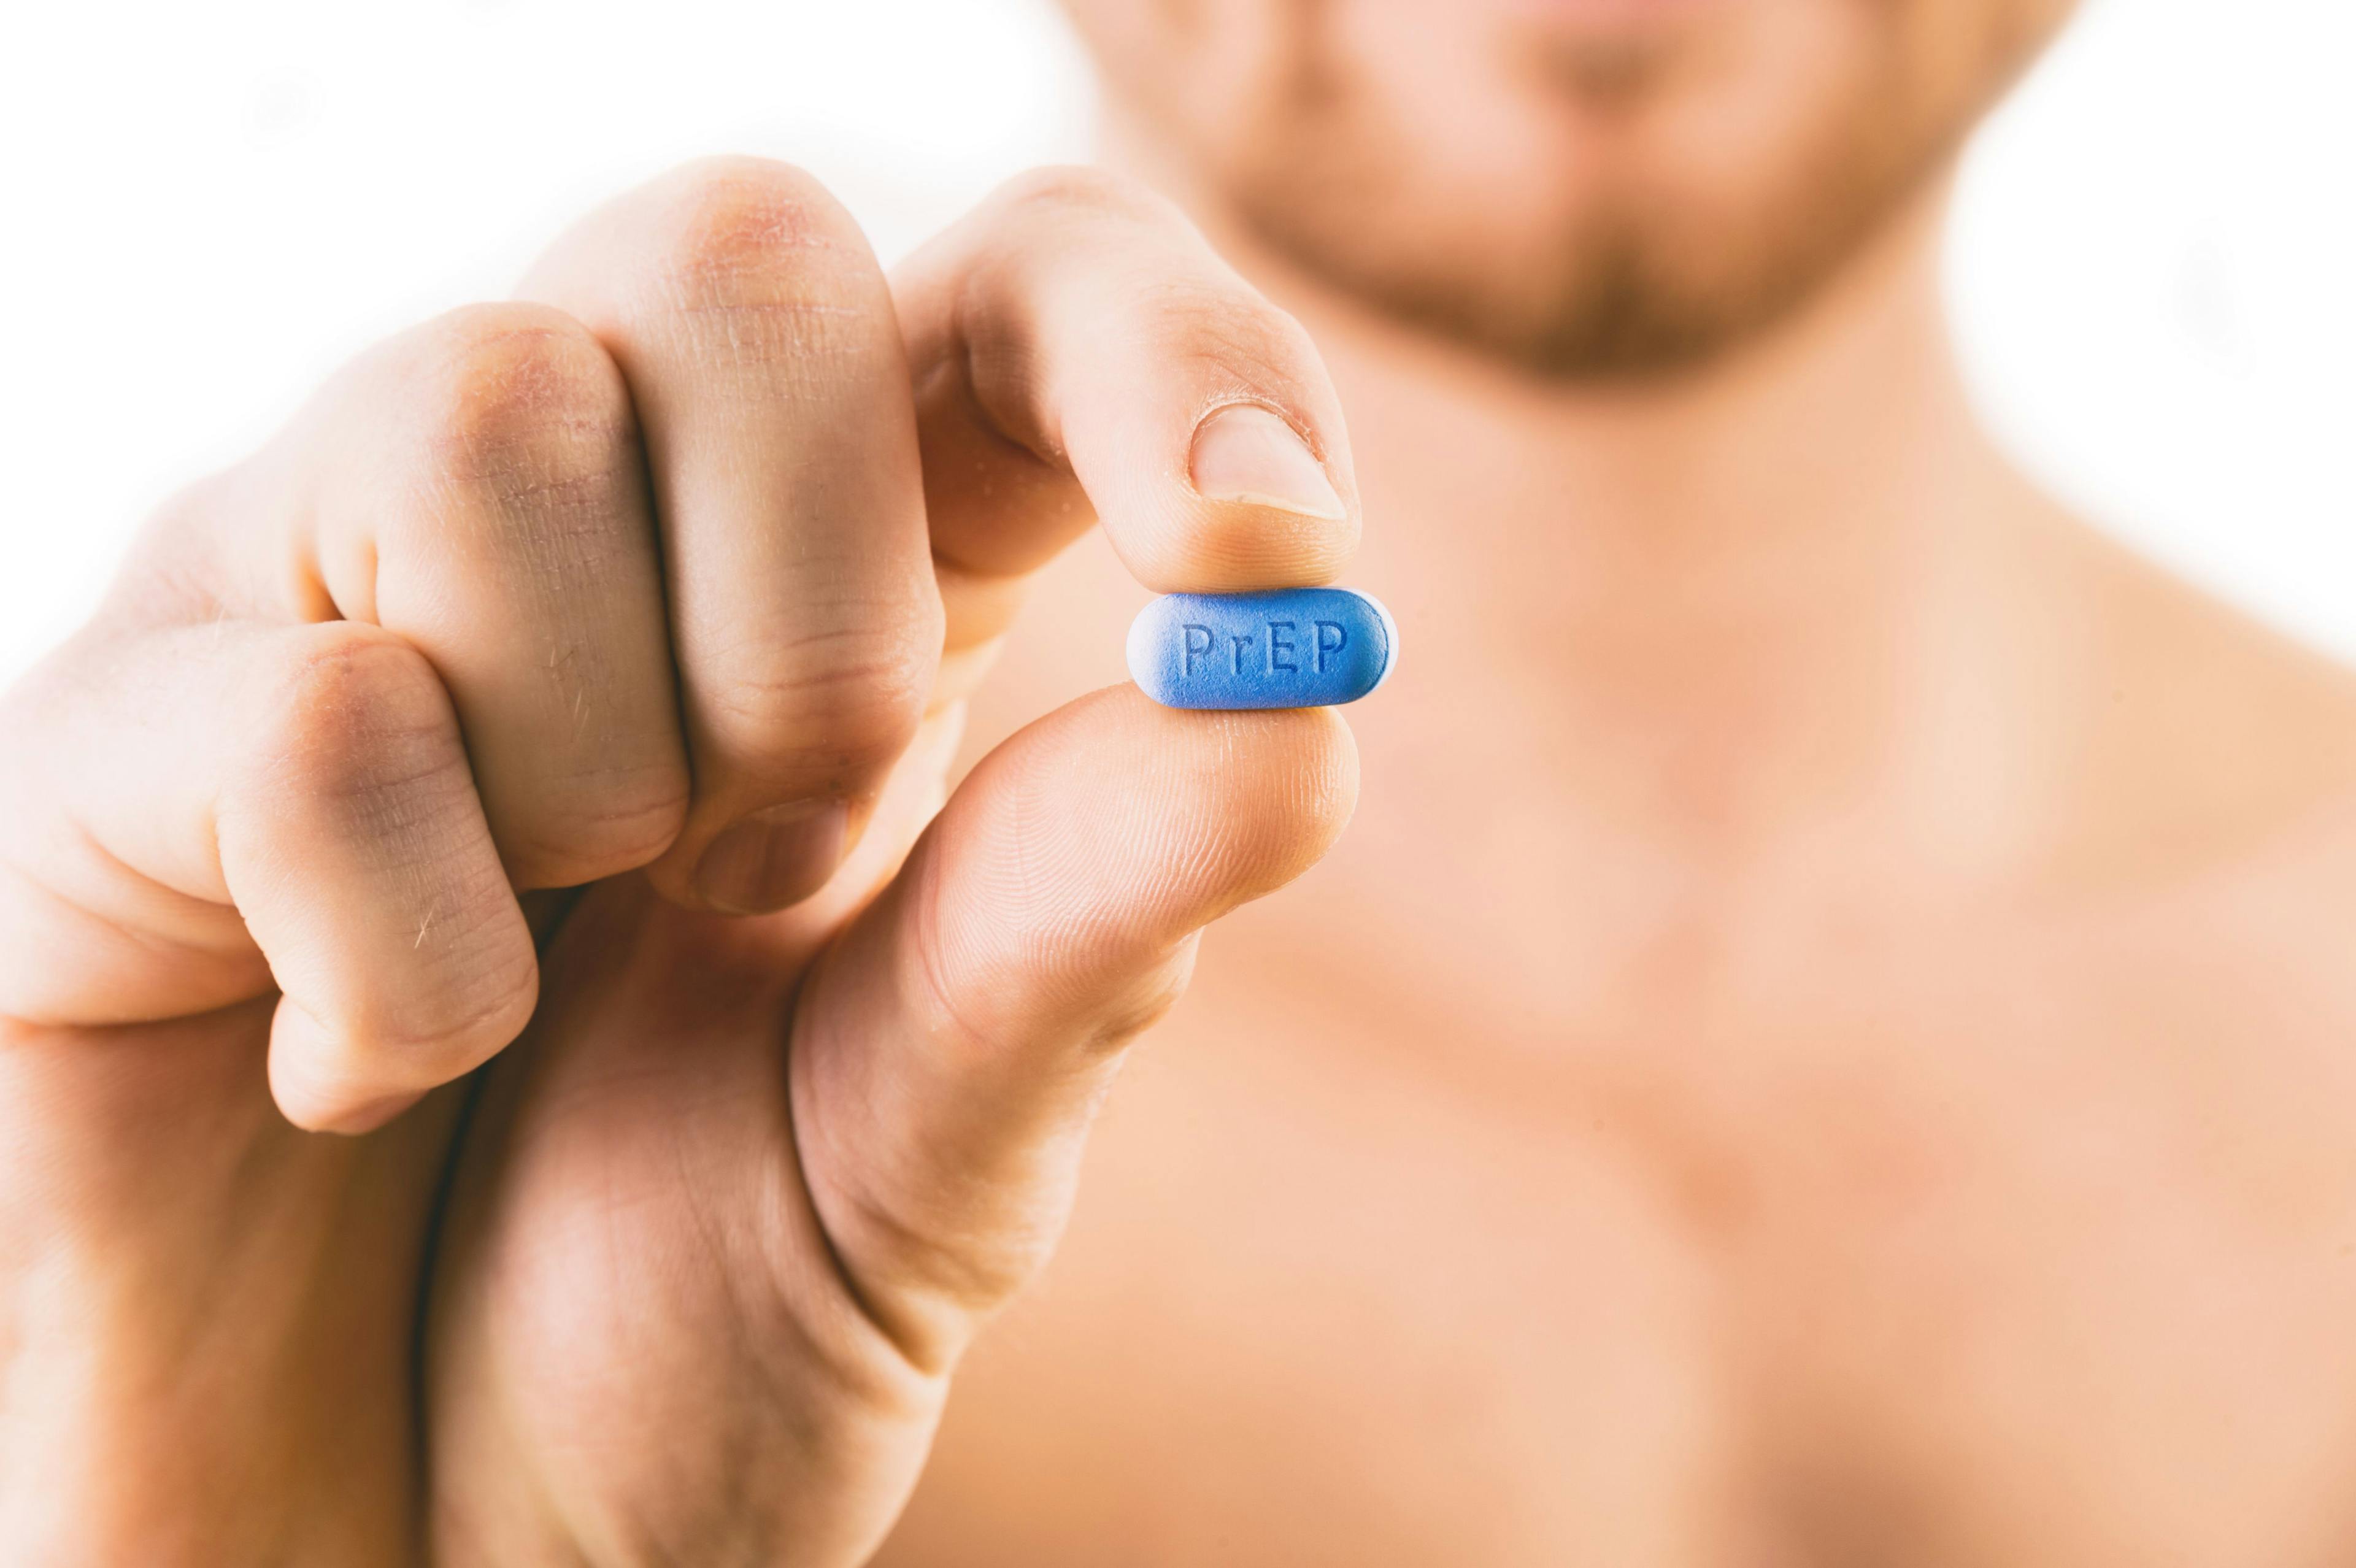 Man holding a pill used for Pre-Exposure Prophylaxis (PrEP) to p- Image credit: Mbruxelle | stock.adobe.com